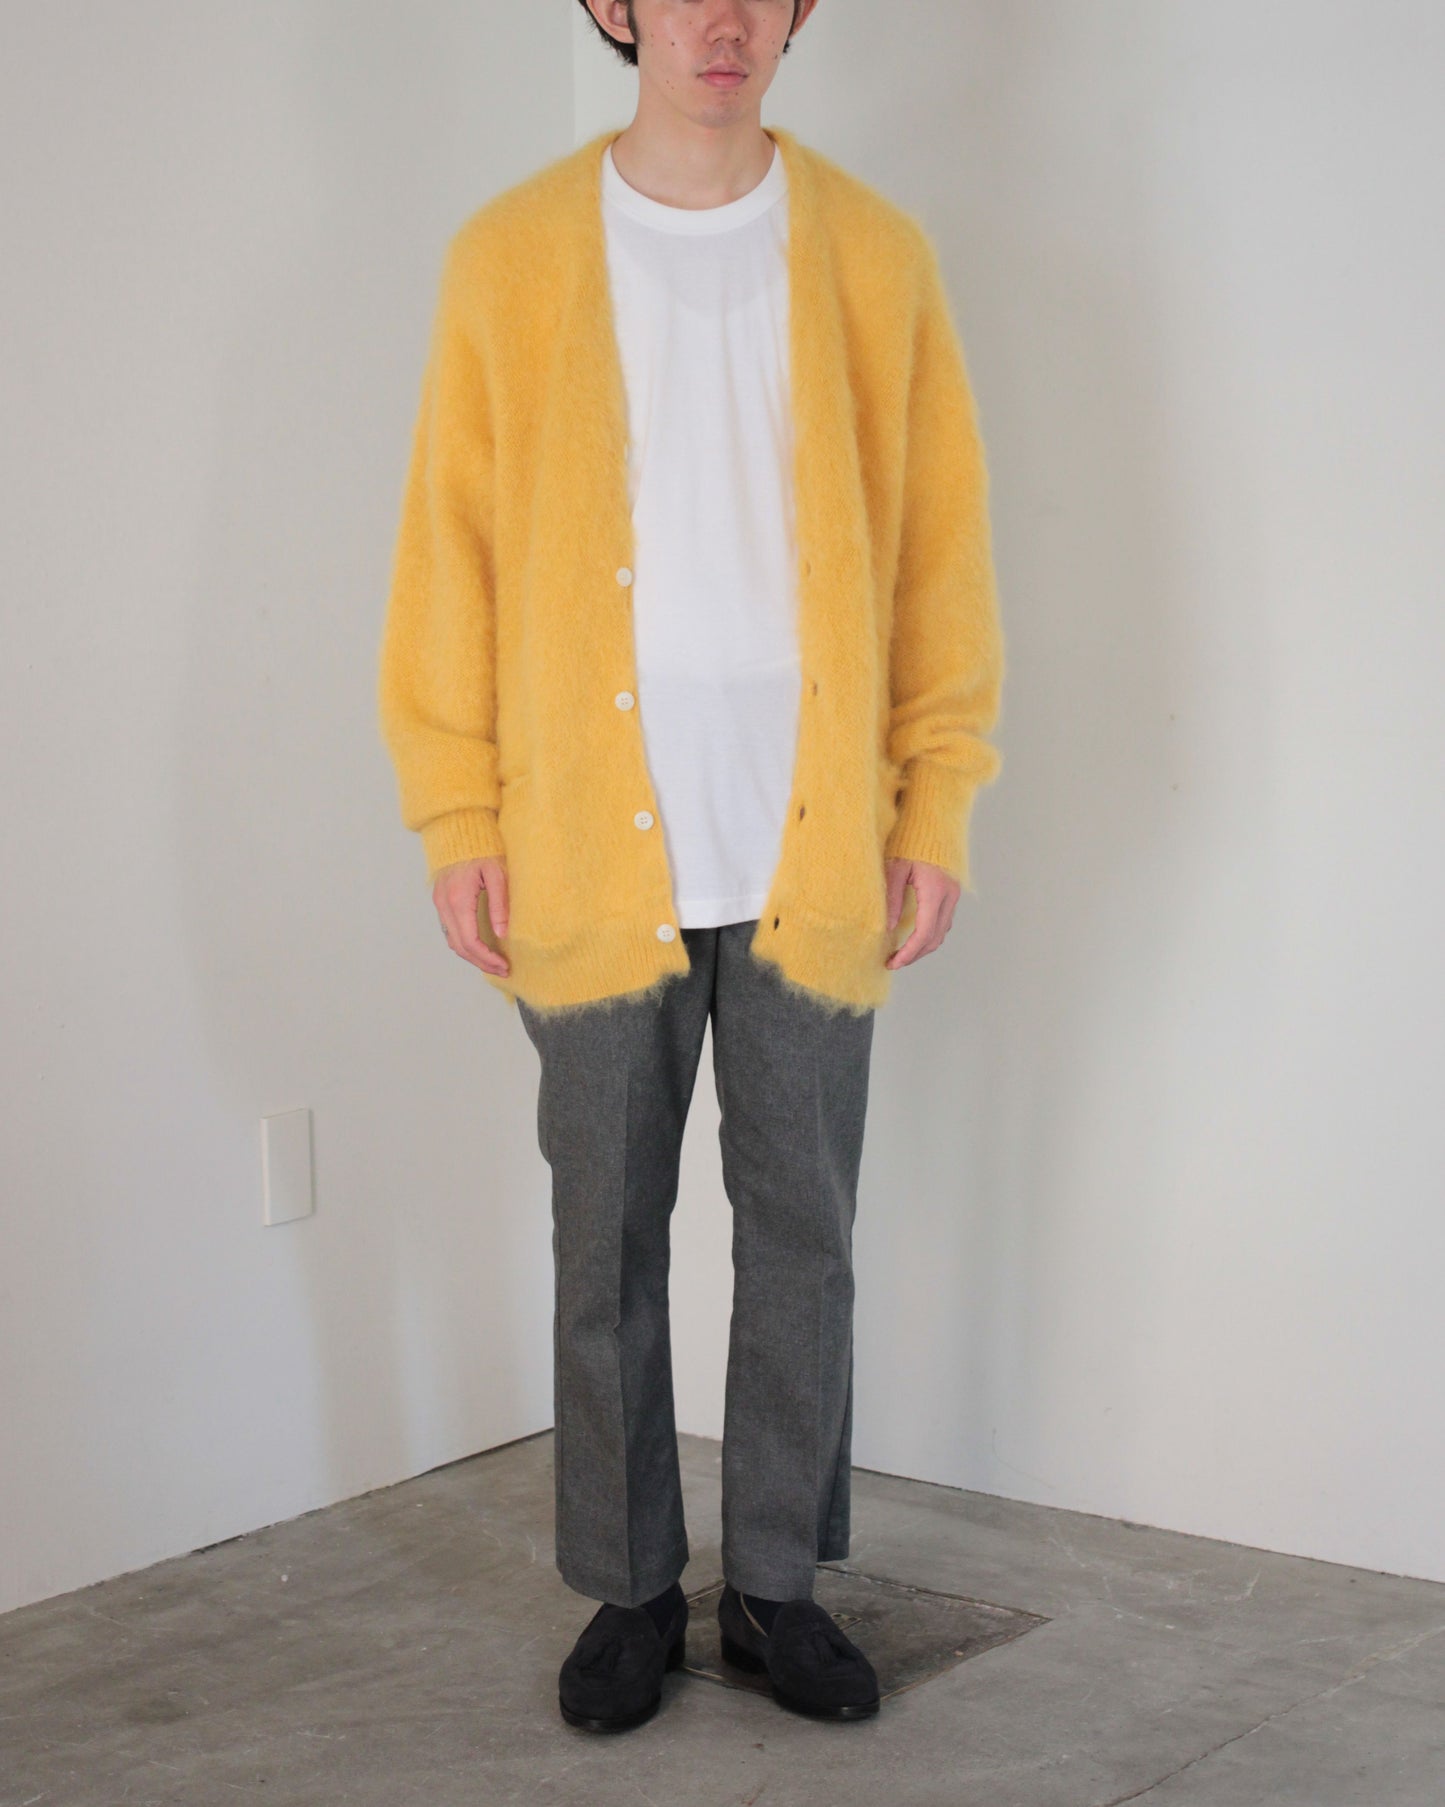 seven by seven/KNIT CARDIGAN - Brushed mohair - "YELLOW"